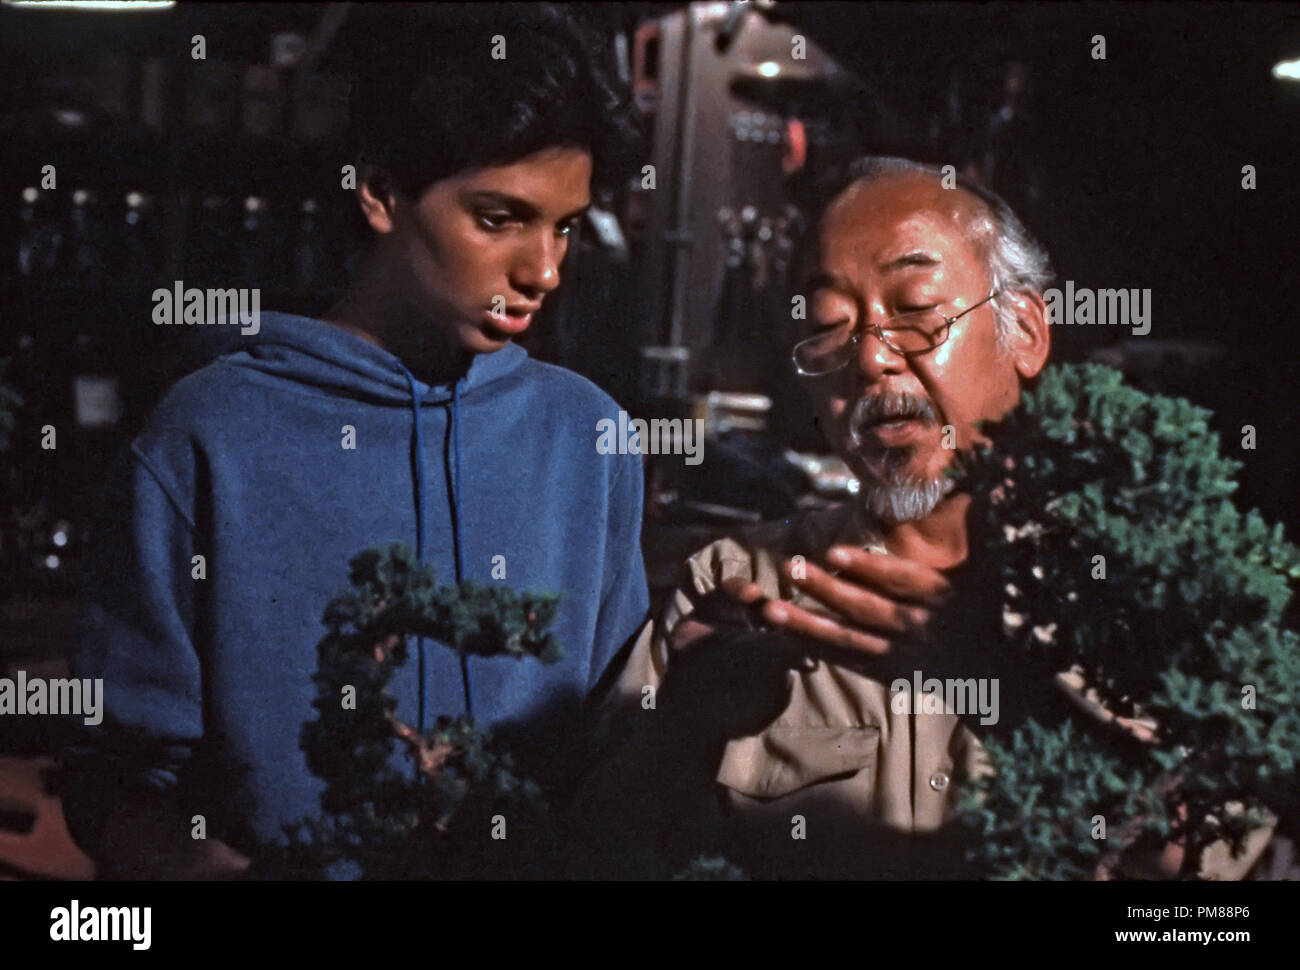 Studio Publicity Still from 'The Karate Kid' Ralph Macchio, Pat Morita  © 1984 Columbia  All Rights Reserved   File Reference # 31706081THA  For Editorial Use Only Stock Photo